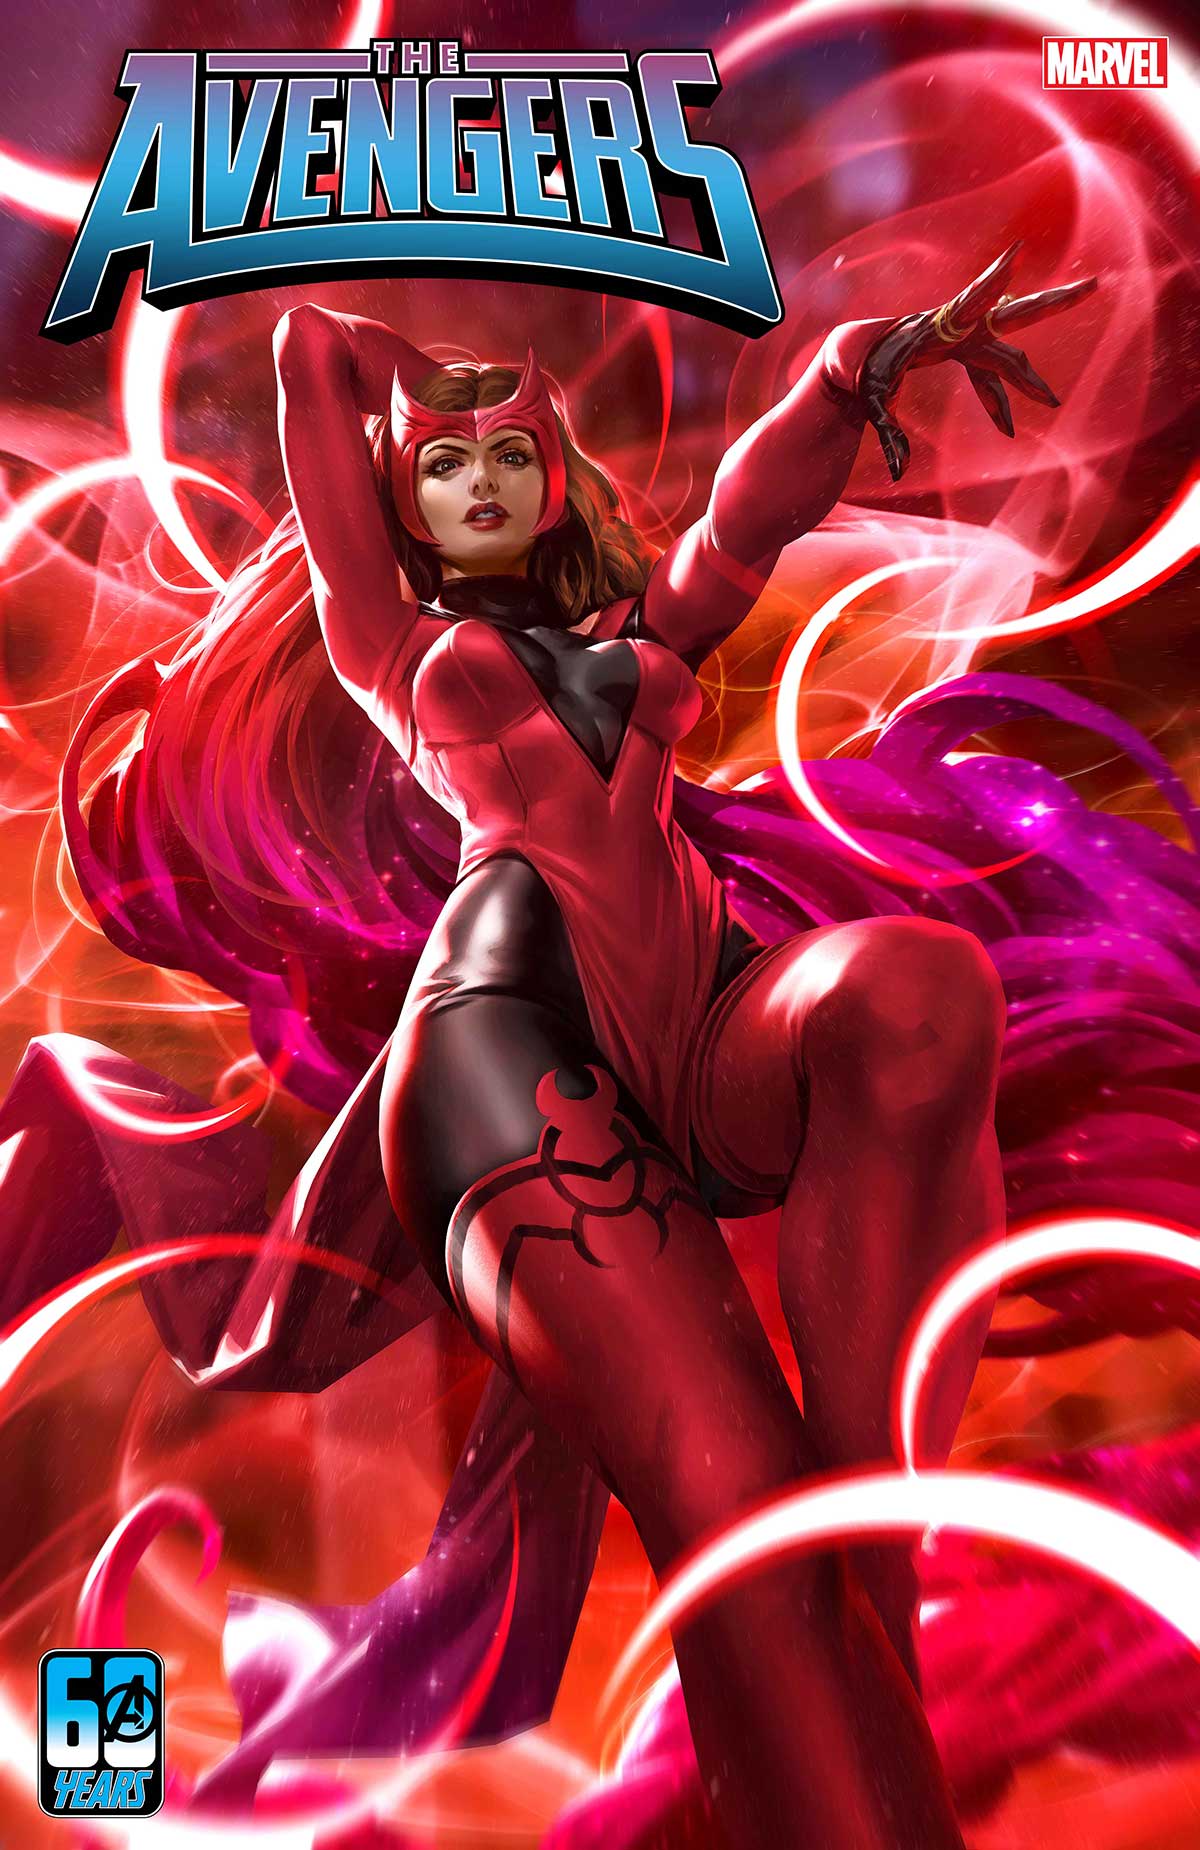 Scarlet Witch #3 review – Too Dangerous For a Girl 2